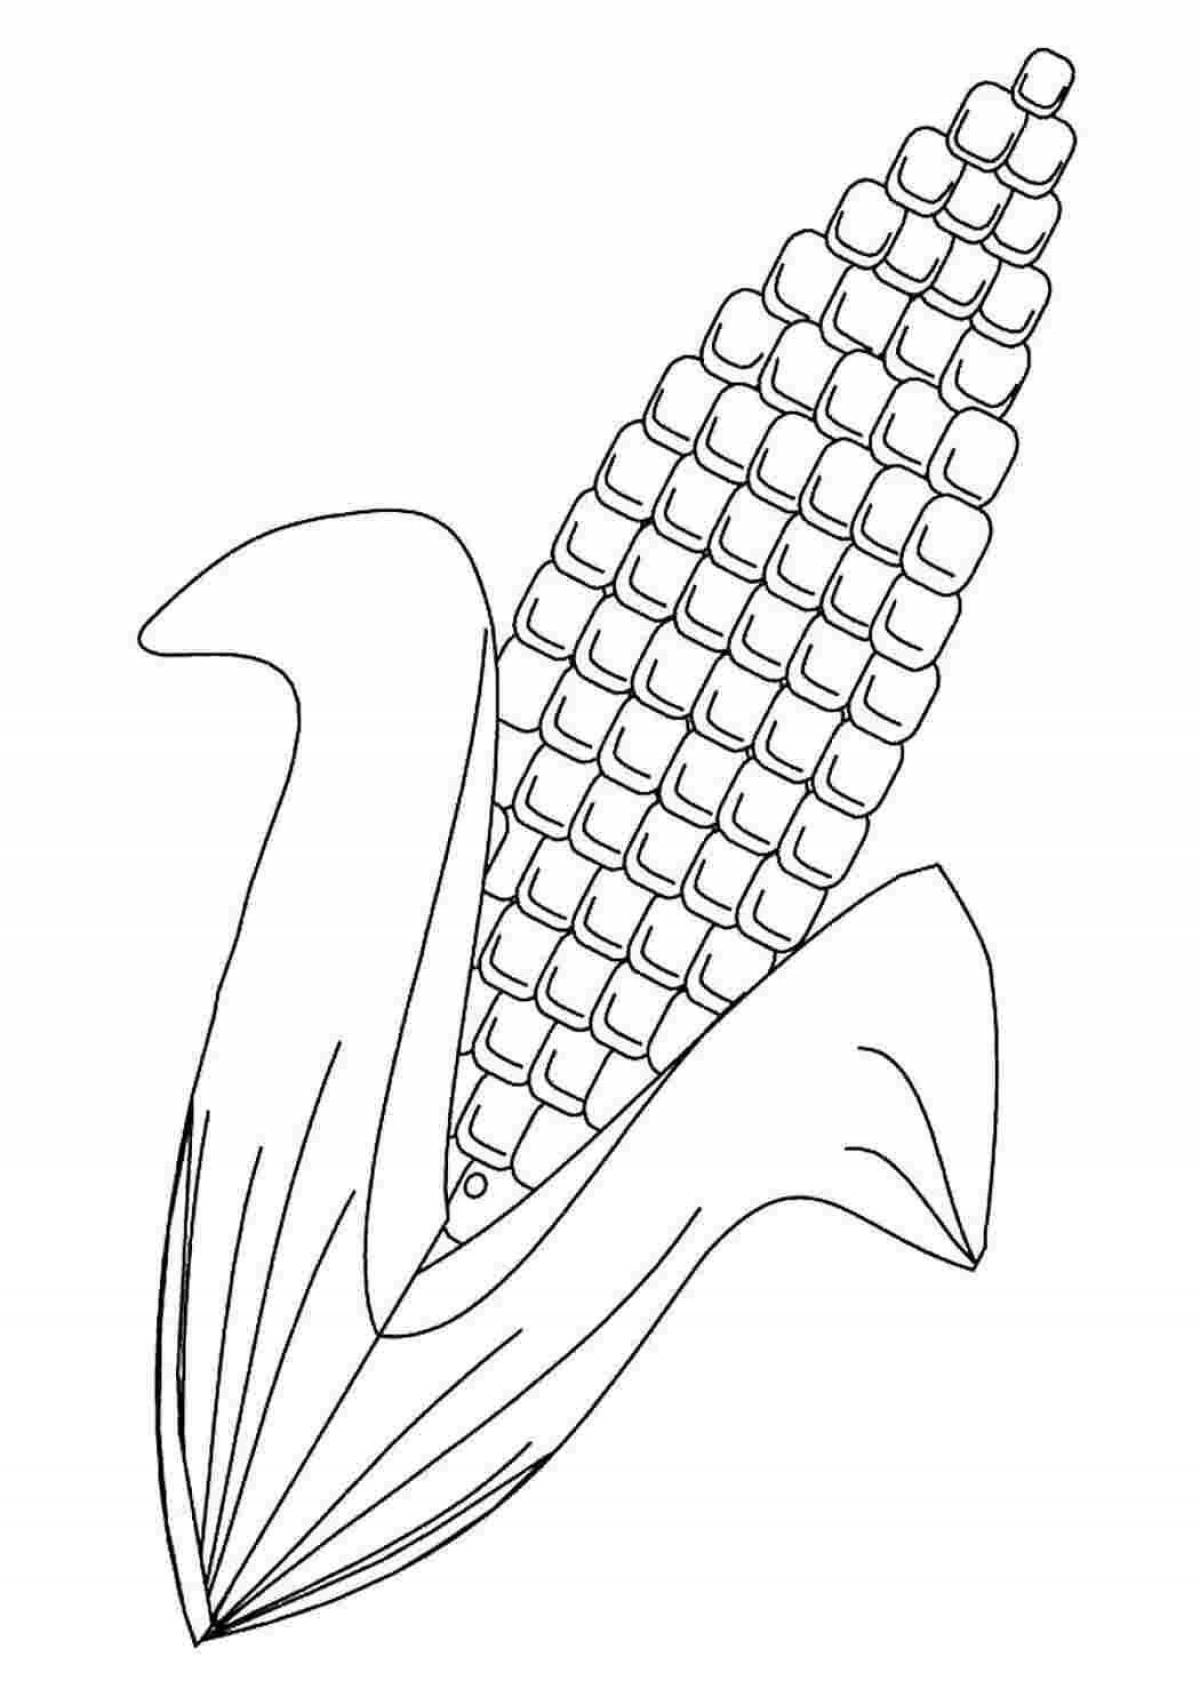 Colorful corn coloring page for kids